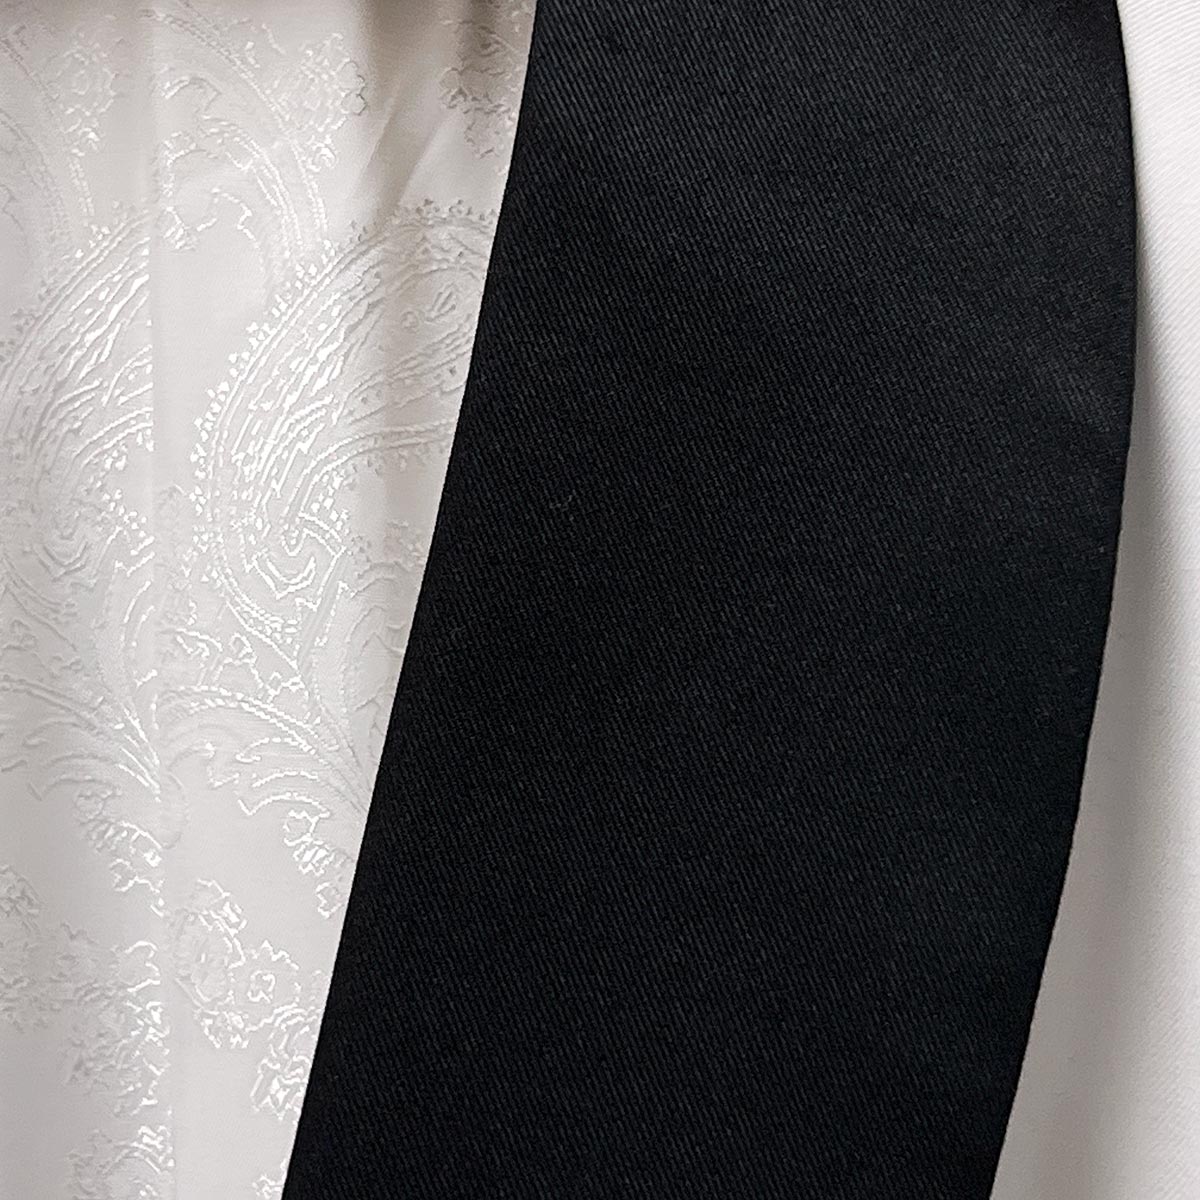 Tuxedo by Westwood Hart, made from 100% Australian Merino wool, complemented by black grosgrain trimming.